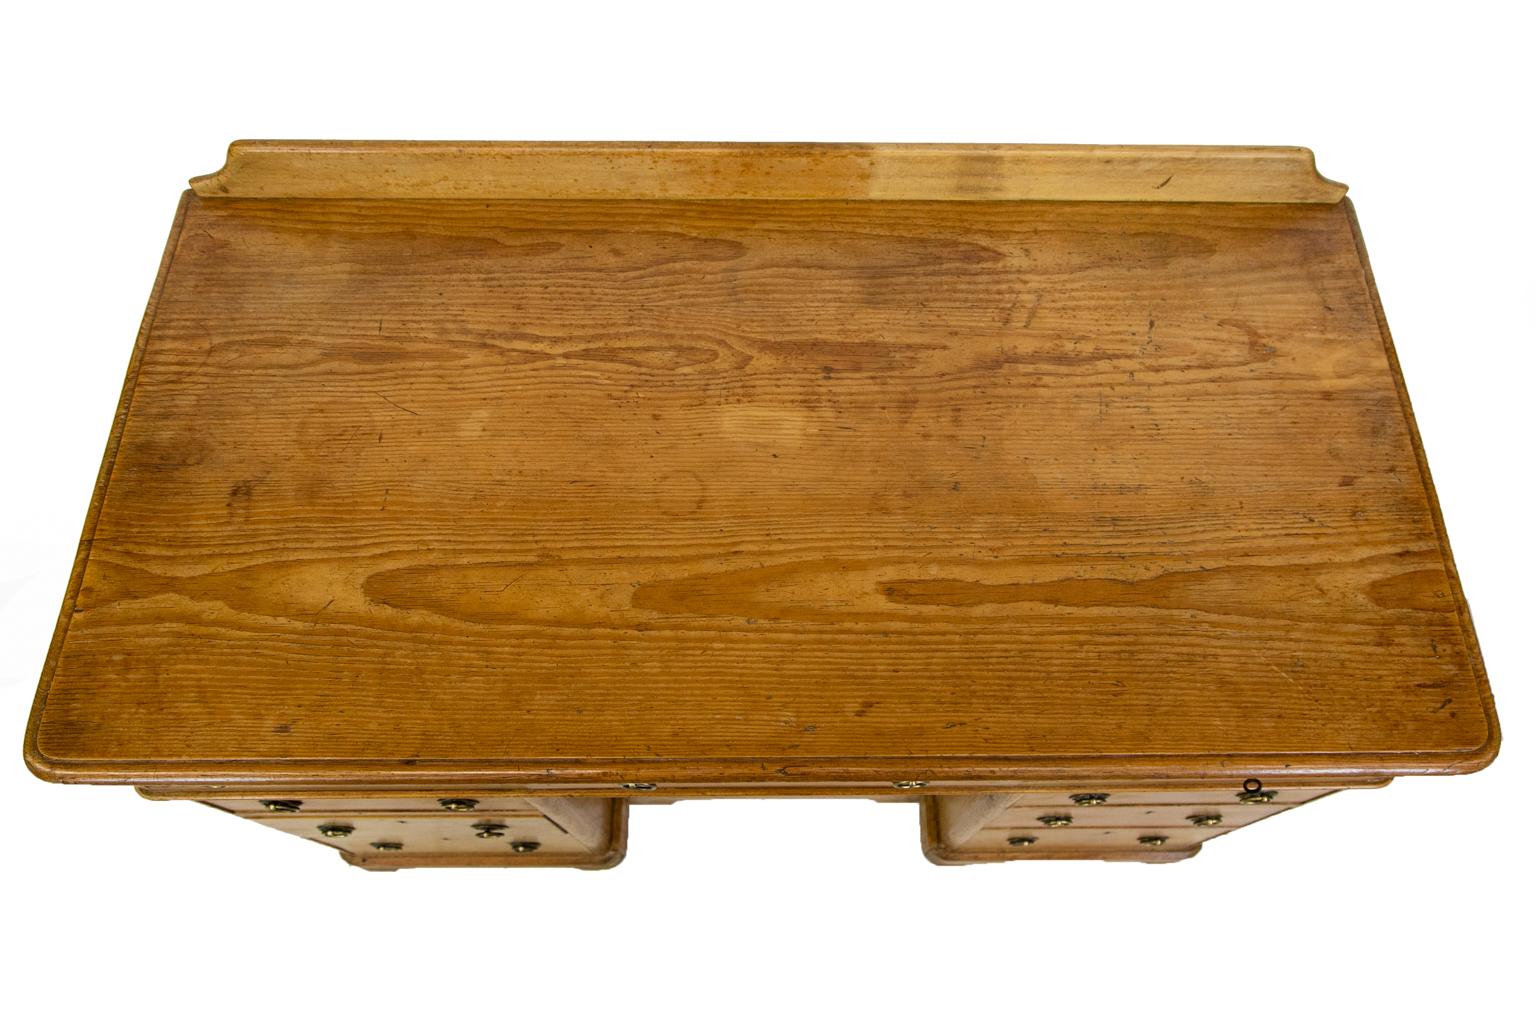 English pine knee hole server has nine drawers. All have the original brass locks with working key signed by Hobbs and Company in London. The top has a bullnose edge and a smaller bullnose molding under the top three drawers. 
   